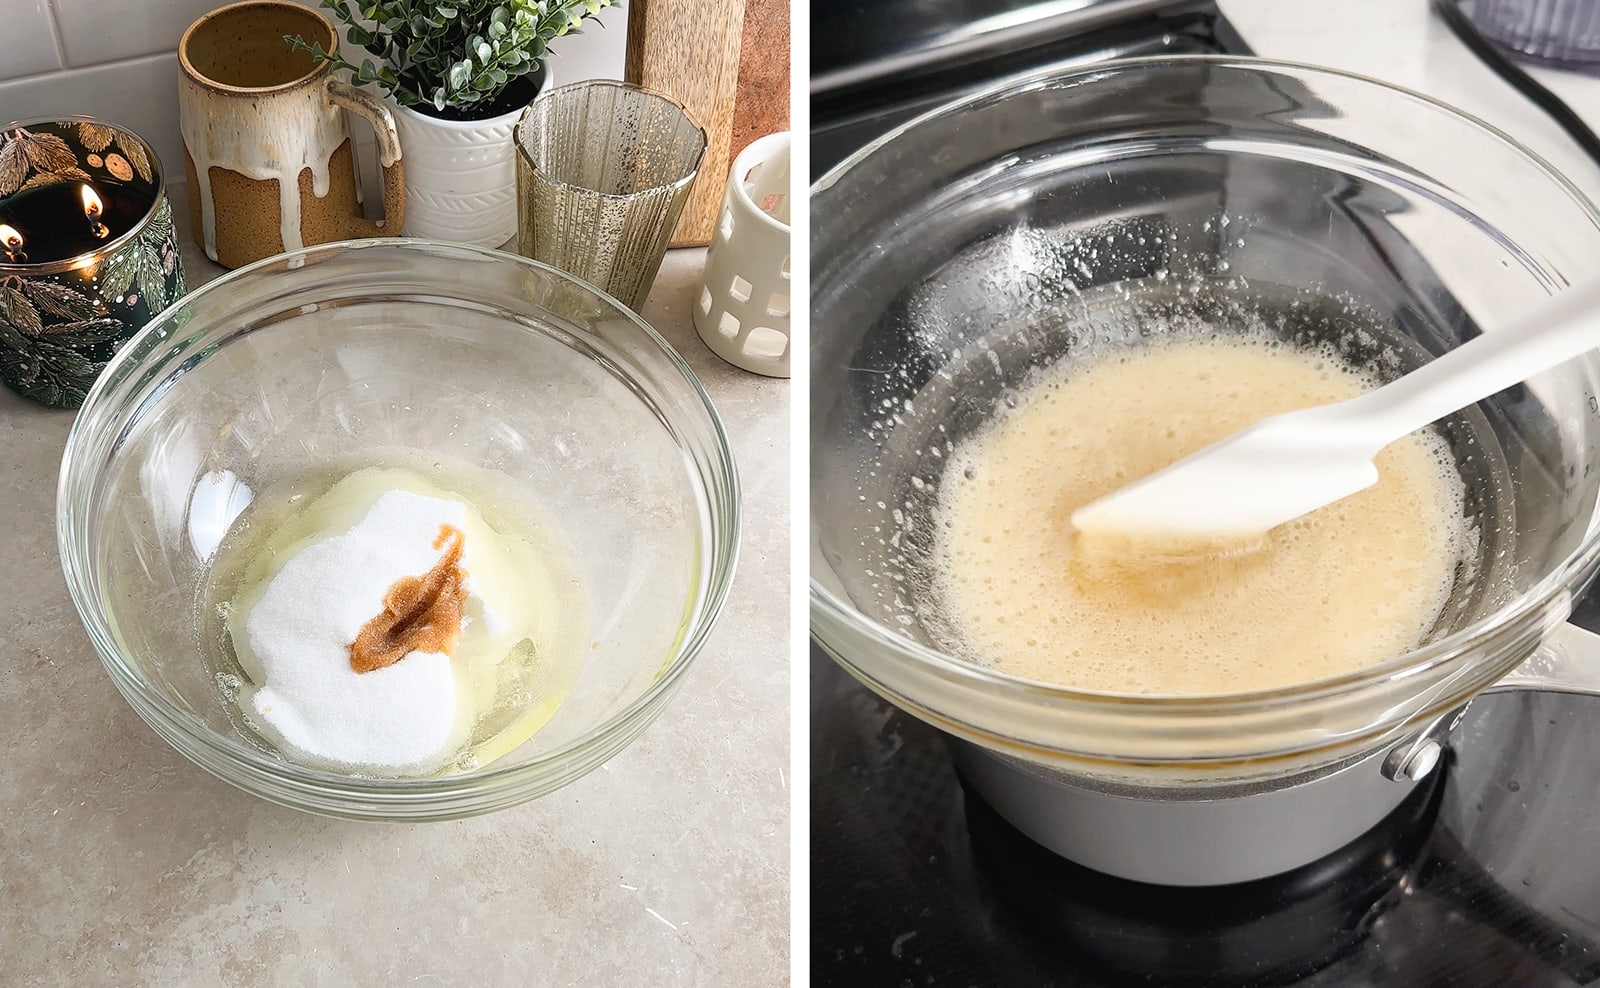 Left to right: egg whites and sugar in a bowl, a double boiler with an egg white mixture in the bowl.